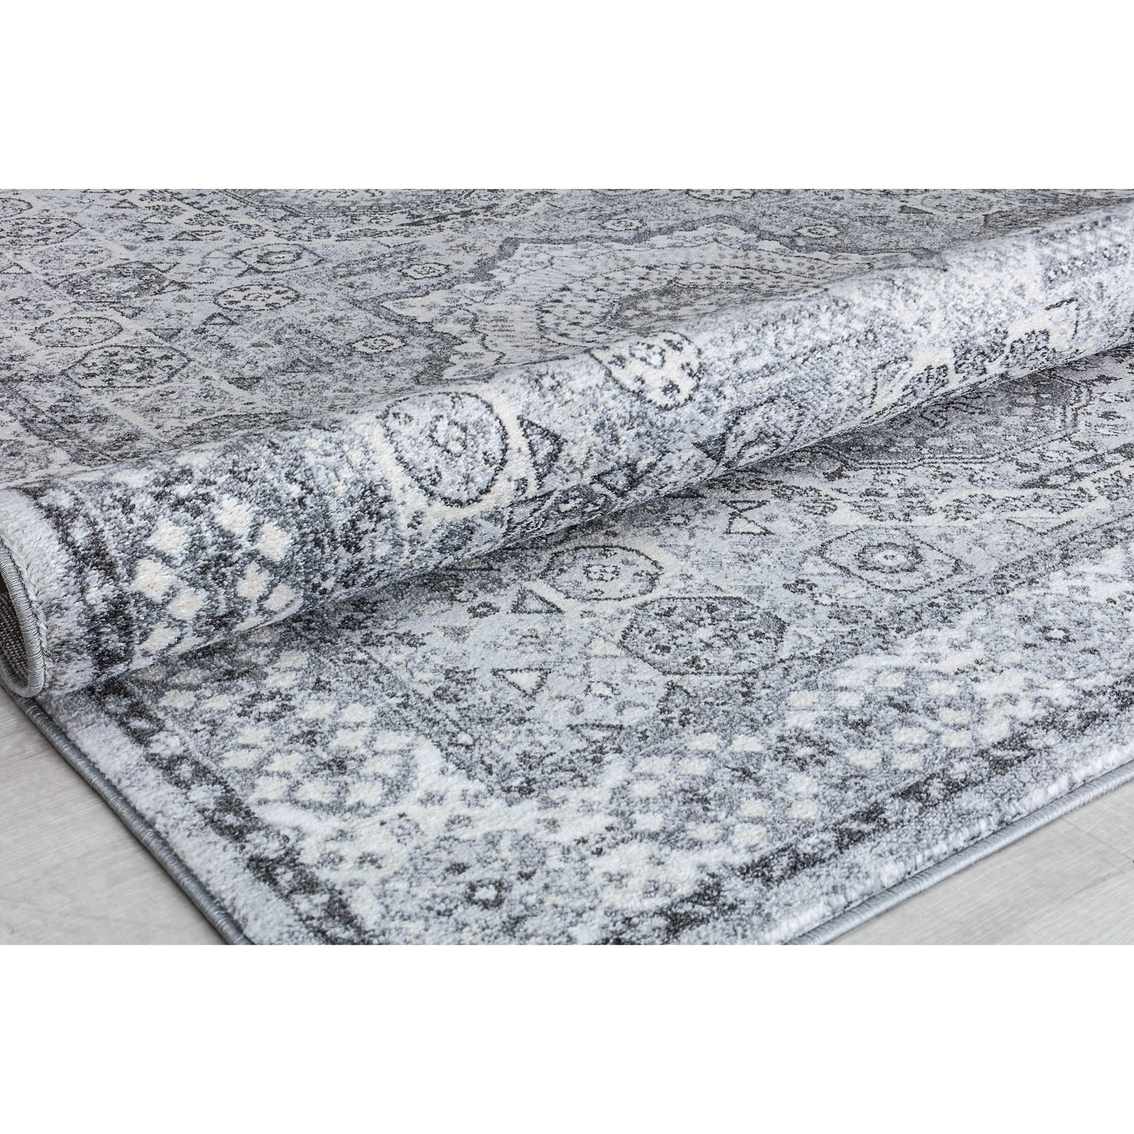 Rugs America Harper Silvery Moon Abstract Vintage Area Rug - Image 5 of 8